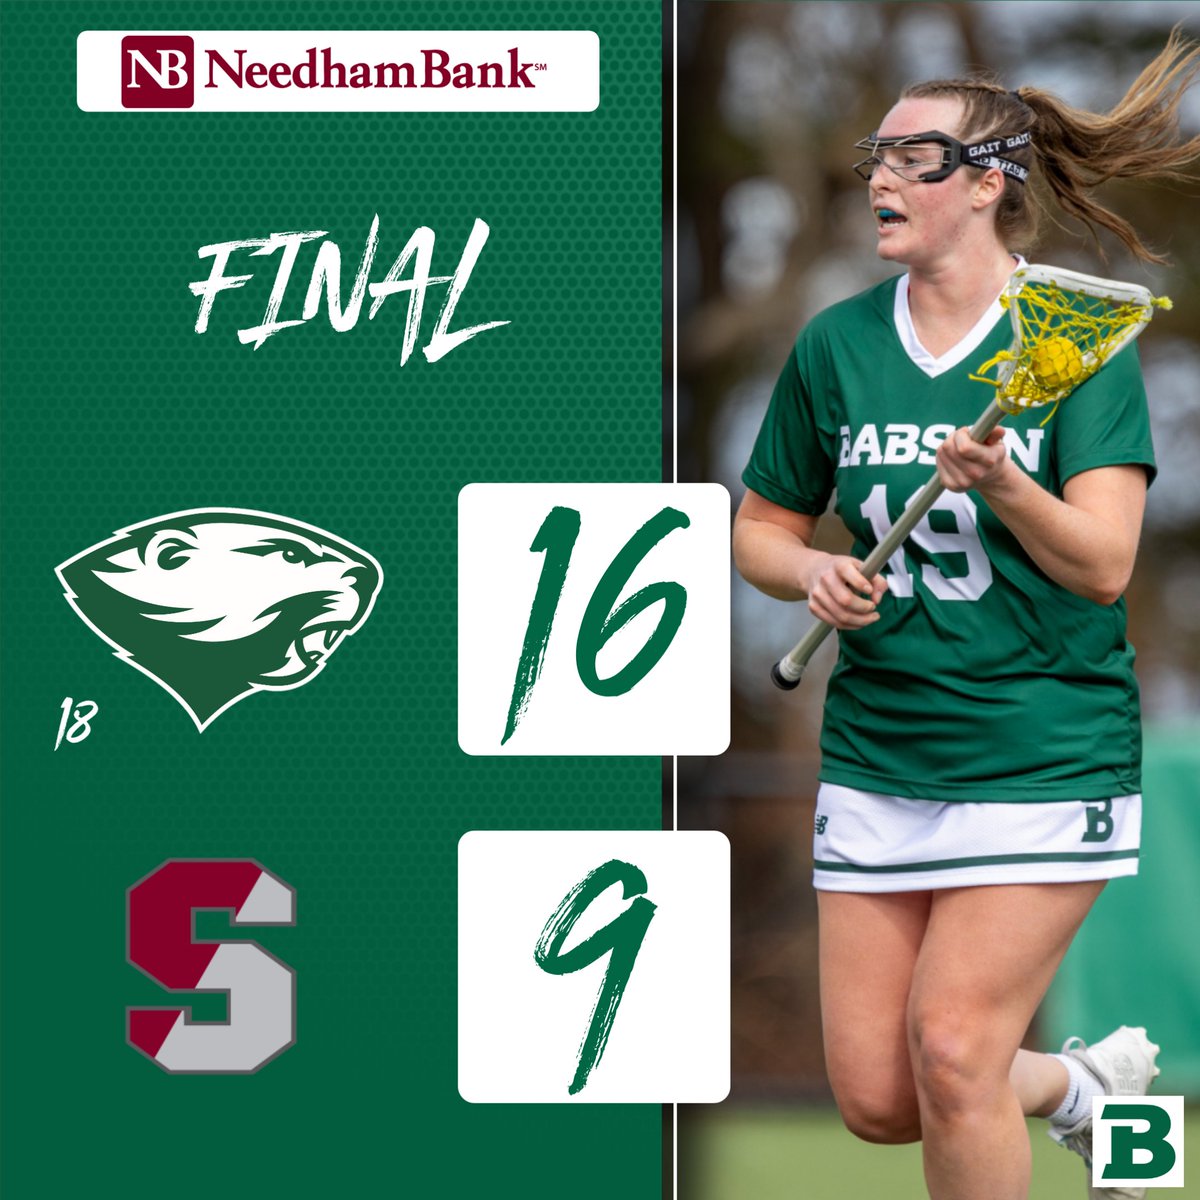 Clare Connolly led all players with 16 draw controls and scored four times while Kathleen Murphy made 12 saves as No. 18 @BabsonWLax clinched its fourth @NEWMACsports regular season title in six seasons with a 16-9 win at @SC_Pride on Saturday. #GoBabo #d3wlax